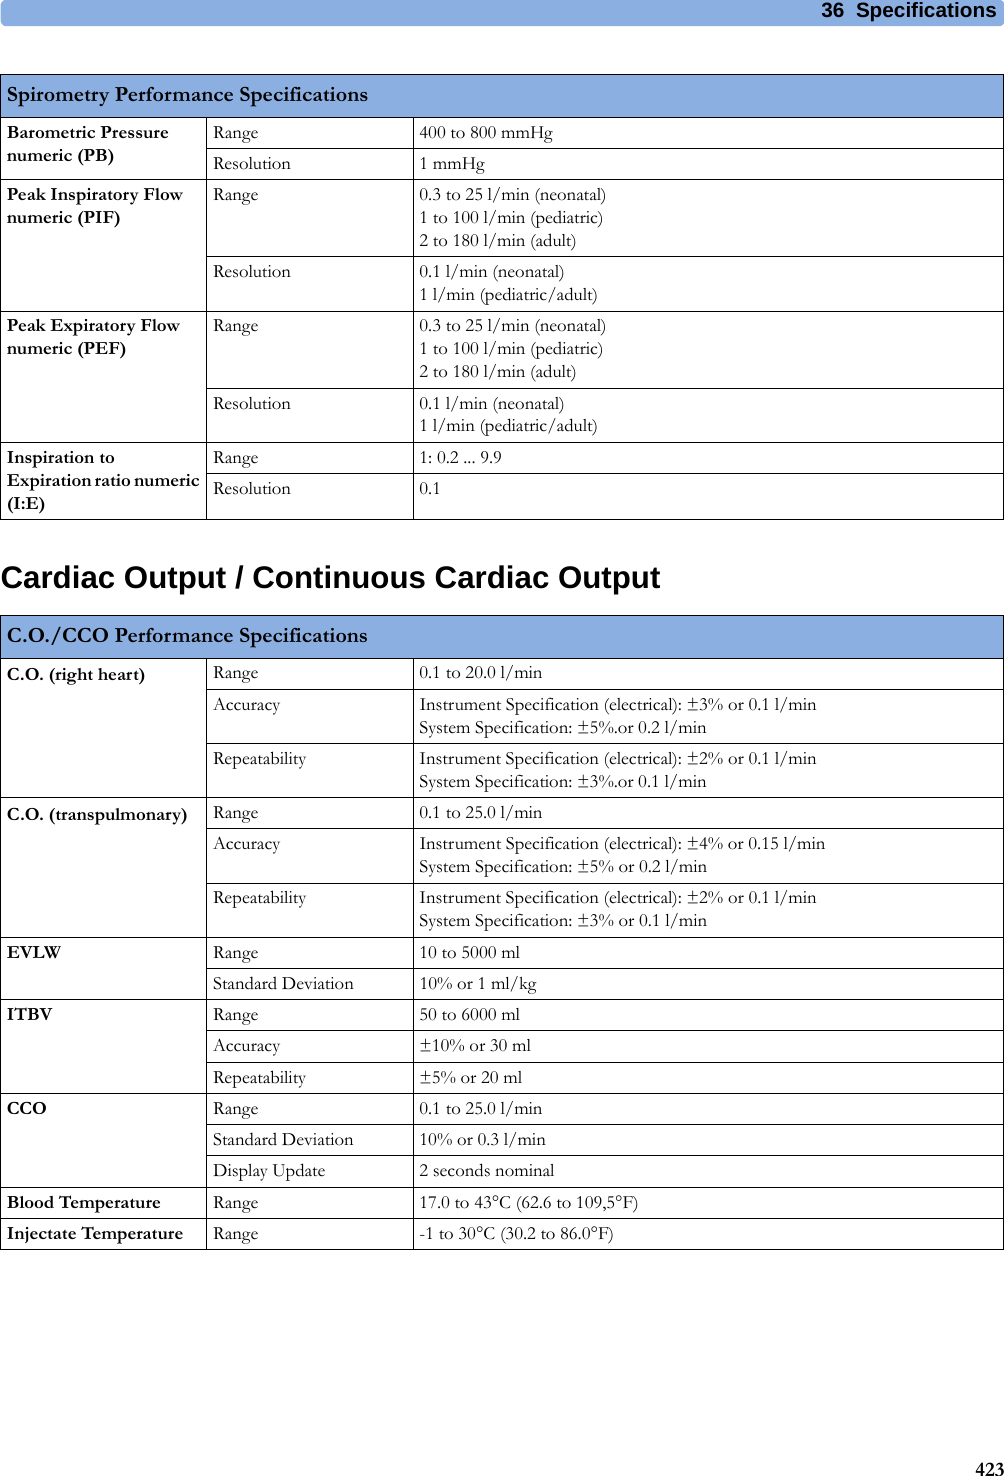 36 Specifications423Cardiac Output / Continuous Cardiac OutputBarometric Pressure numeric (PB)Range 400 to 800 mmHgResolution 1 mmHgPeak Inspiratory Flow numeric (PIF)Range 0.3 to 25 l/min (neonatal)1 to 100 l/min (pediatric)2 to 180 l/min (adult)Resolution 0.1 l/min (neonatal)1 l/min (pediatric/adult)Peak Expiratory Flow numeric (PEF)Range 0.3 to 25 l/min (neonatal)1 to 100 l/min (pediatric)2 to 180 l/min (adult)Resolution 0.1 l/min (neonatal)1 l/min (pediatric/adult)Inspiration to Expiration ratio numeric (I:E)Range 1: 0.2 ... 9.9Resolution 0.1Spirometry Performance SpecificationsC.O./CCO Performance SpecificationsC.O. (right heart) Range 0.1 to 20.0 l/minAccuracy Instrument Specification (electrical): ±3% or 0.1 l/minSystem Specification: ±5%.or 0.2 l/minRepeatability Instrument Specification (electrical): ±2% or 0.1 l/minSystem Specification: ±3%.or 0.1 l/minC.O. (transpulmonary) Range 0.1 to 25.0 l/minAccuracy Instrument Specification (electrical): ±4% or 0.15 l/minSystem Specification: ±5% or 0.2 l/minRepeatability Instrument Specification (electrical): ±2% or 0.1 l/minSystem Specification: ±3% or 0.1 l/minEVLW Range 10 to 5000 mlStandard Deviation 10% or 1 ml/kgITBV Range 50 to 6000 mlAccuracy ±10% or 30 mlRepeatability ±5% or 20 mlCCO Range 0.1 to 25.0 l/minStandard Deviation 10% or 0.3 l/minDisplay Update 2 seconds nominalBlood Temperature Range 17.0 to 43°C (62.6 to 109,5°F)Injectate Temperature Range -1 to 30°C (30.2 to 86.0°F)